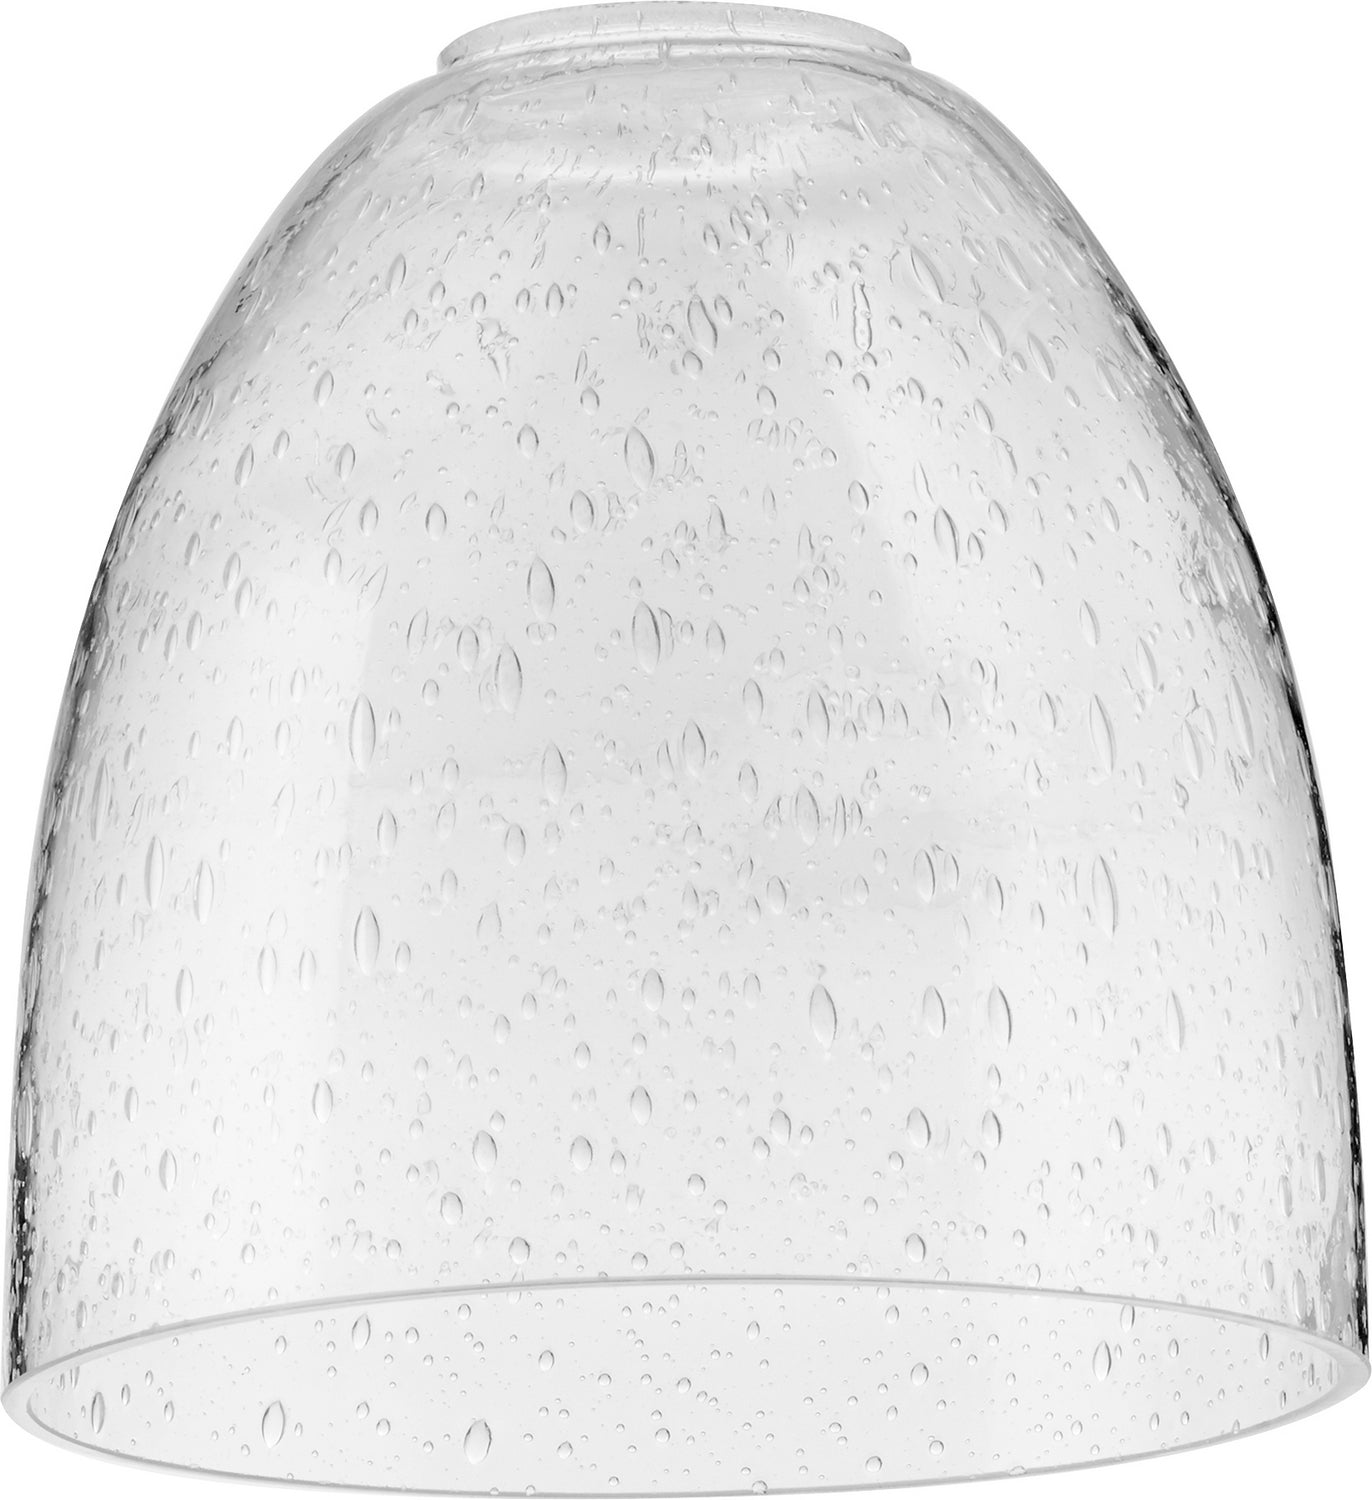 Quorum - 2000 - Lighting Accessory - Glass Series - Clear Seeded